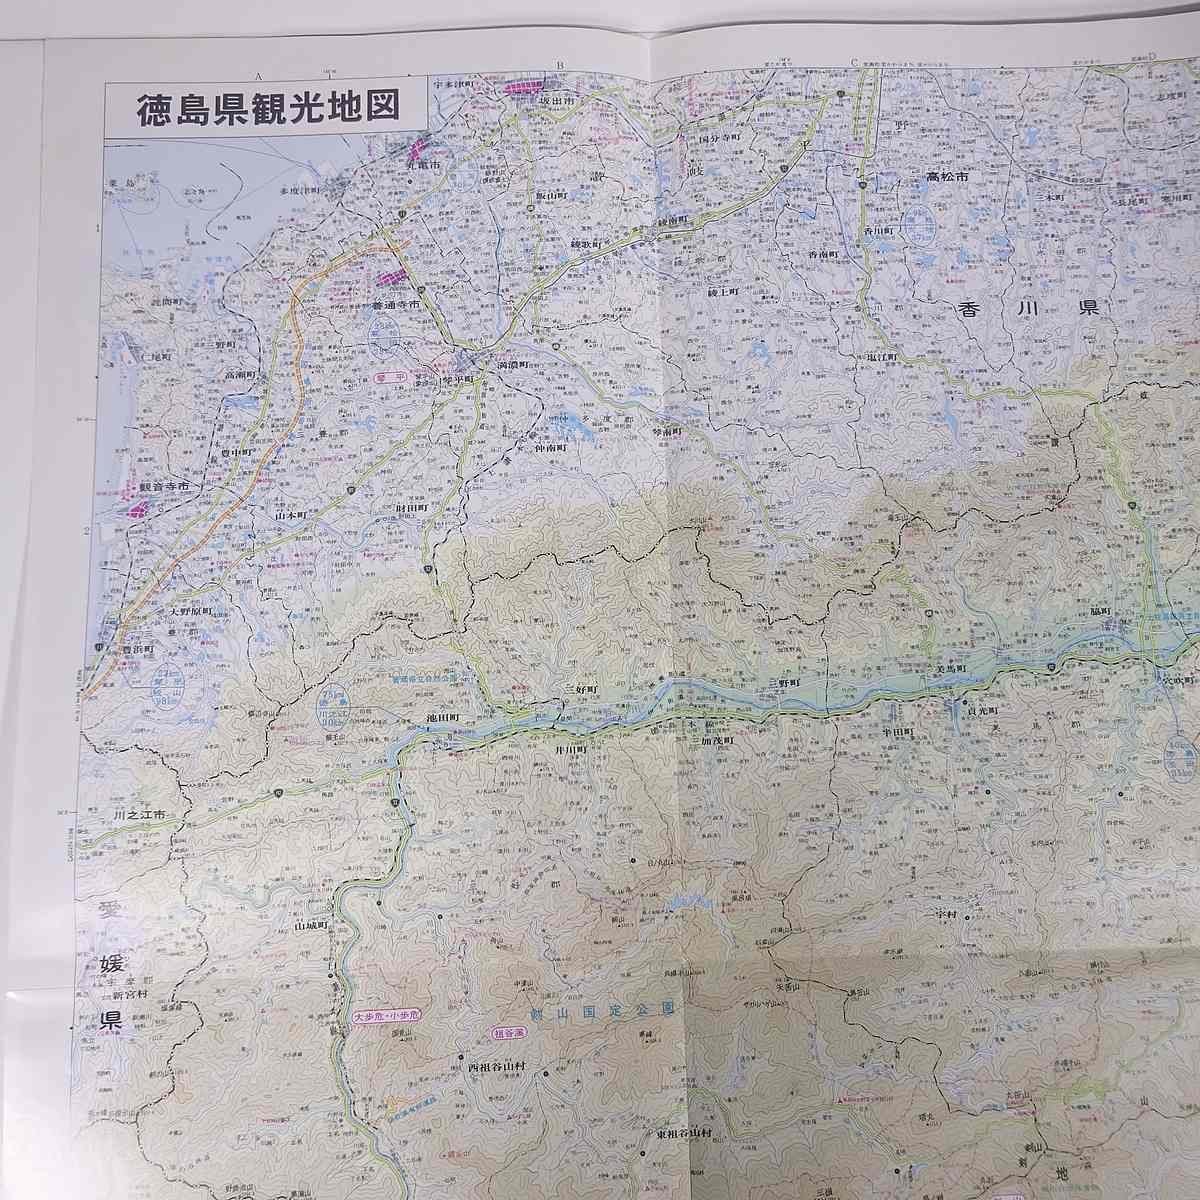 [ map ] Tokushima prefecture tourist attraction map OUR Tokushima size 61cm×80cm Tokushima publish corporation issue year unknown geography map Tokushima prefecture travel sightseeing 